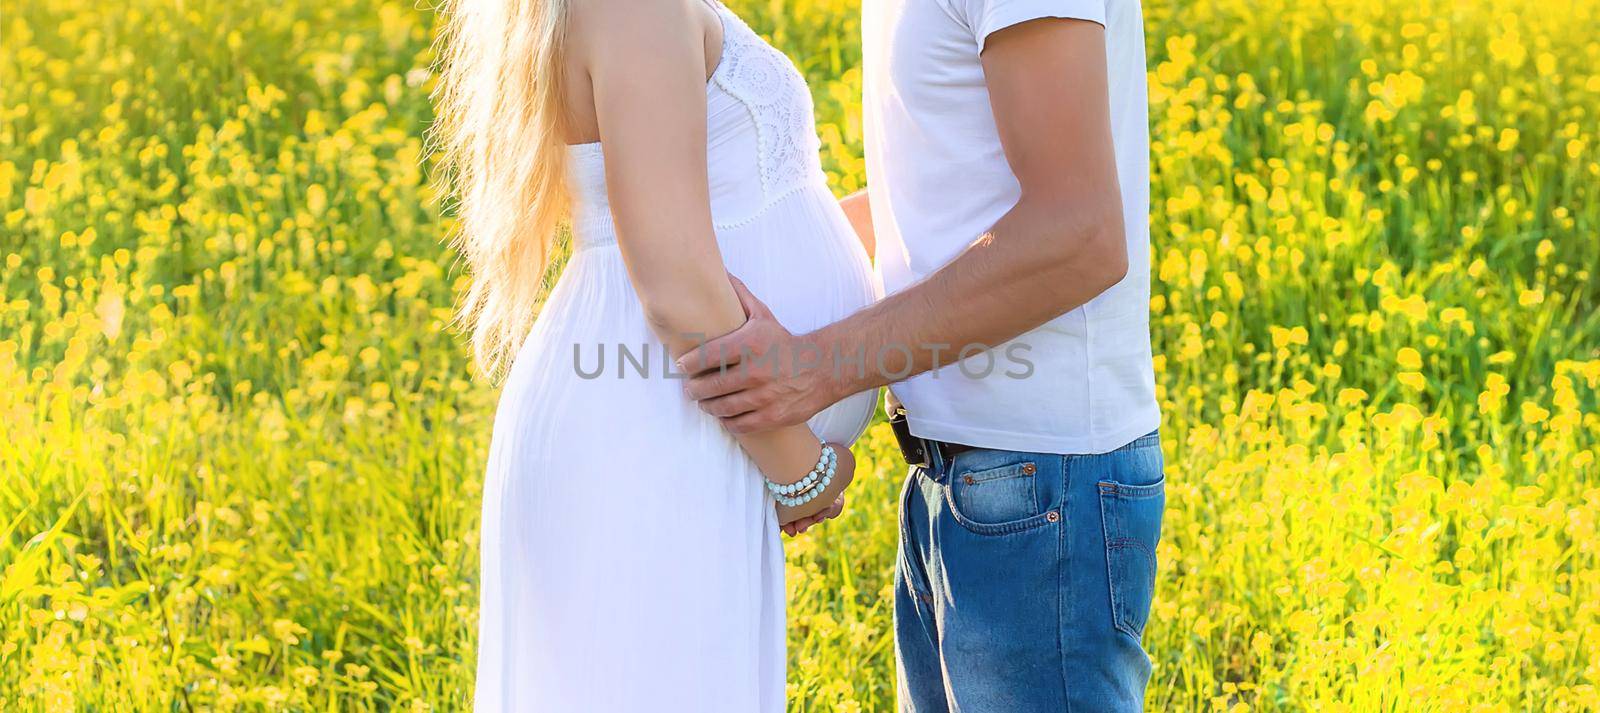 Pregnant woman and man photo shoot in mustard field. Selective focus. by yanadjana